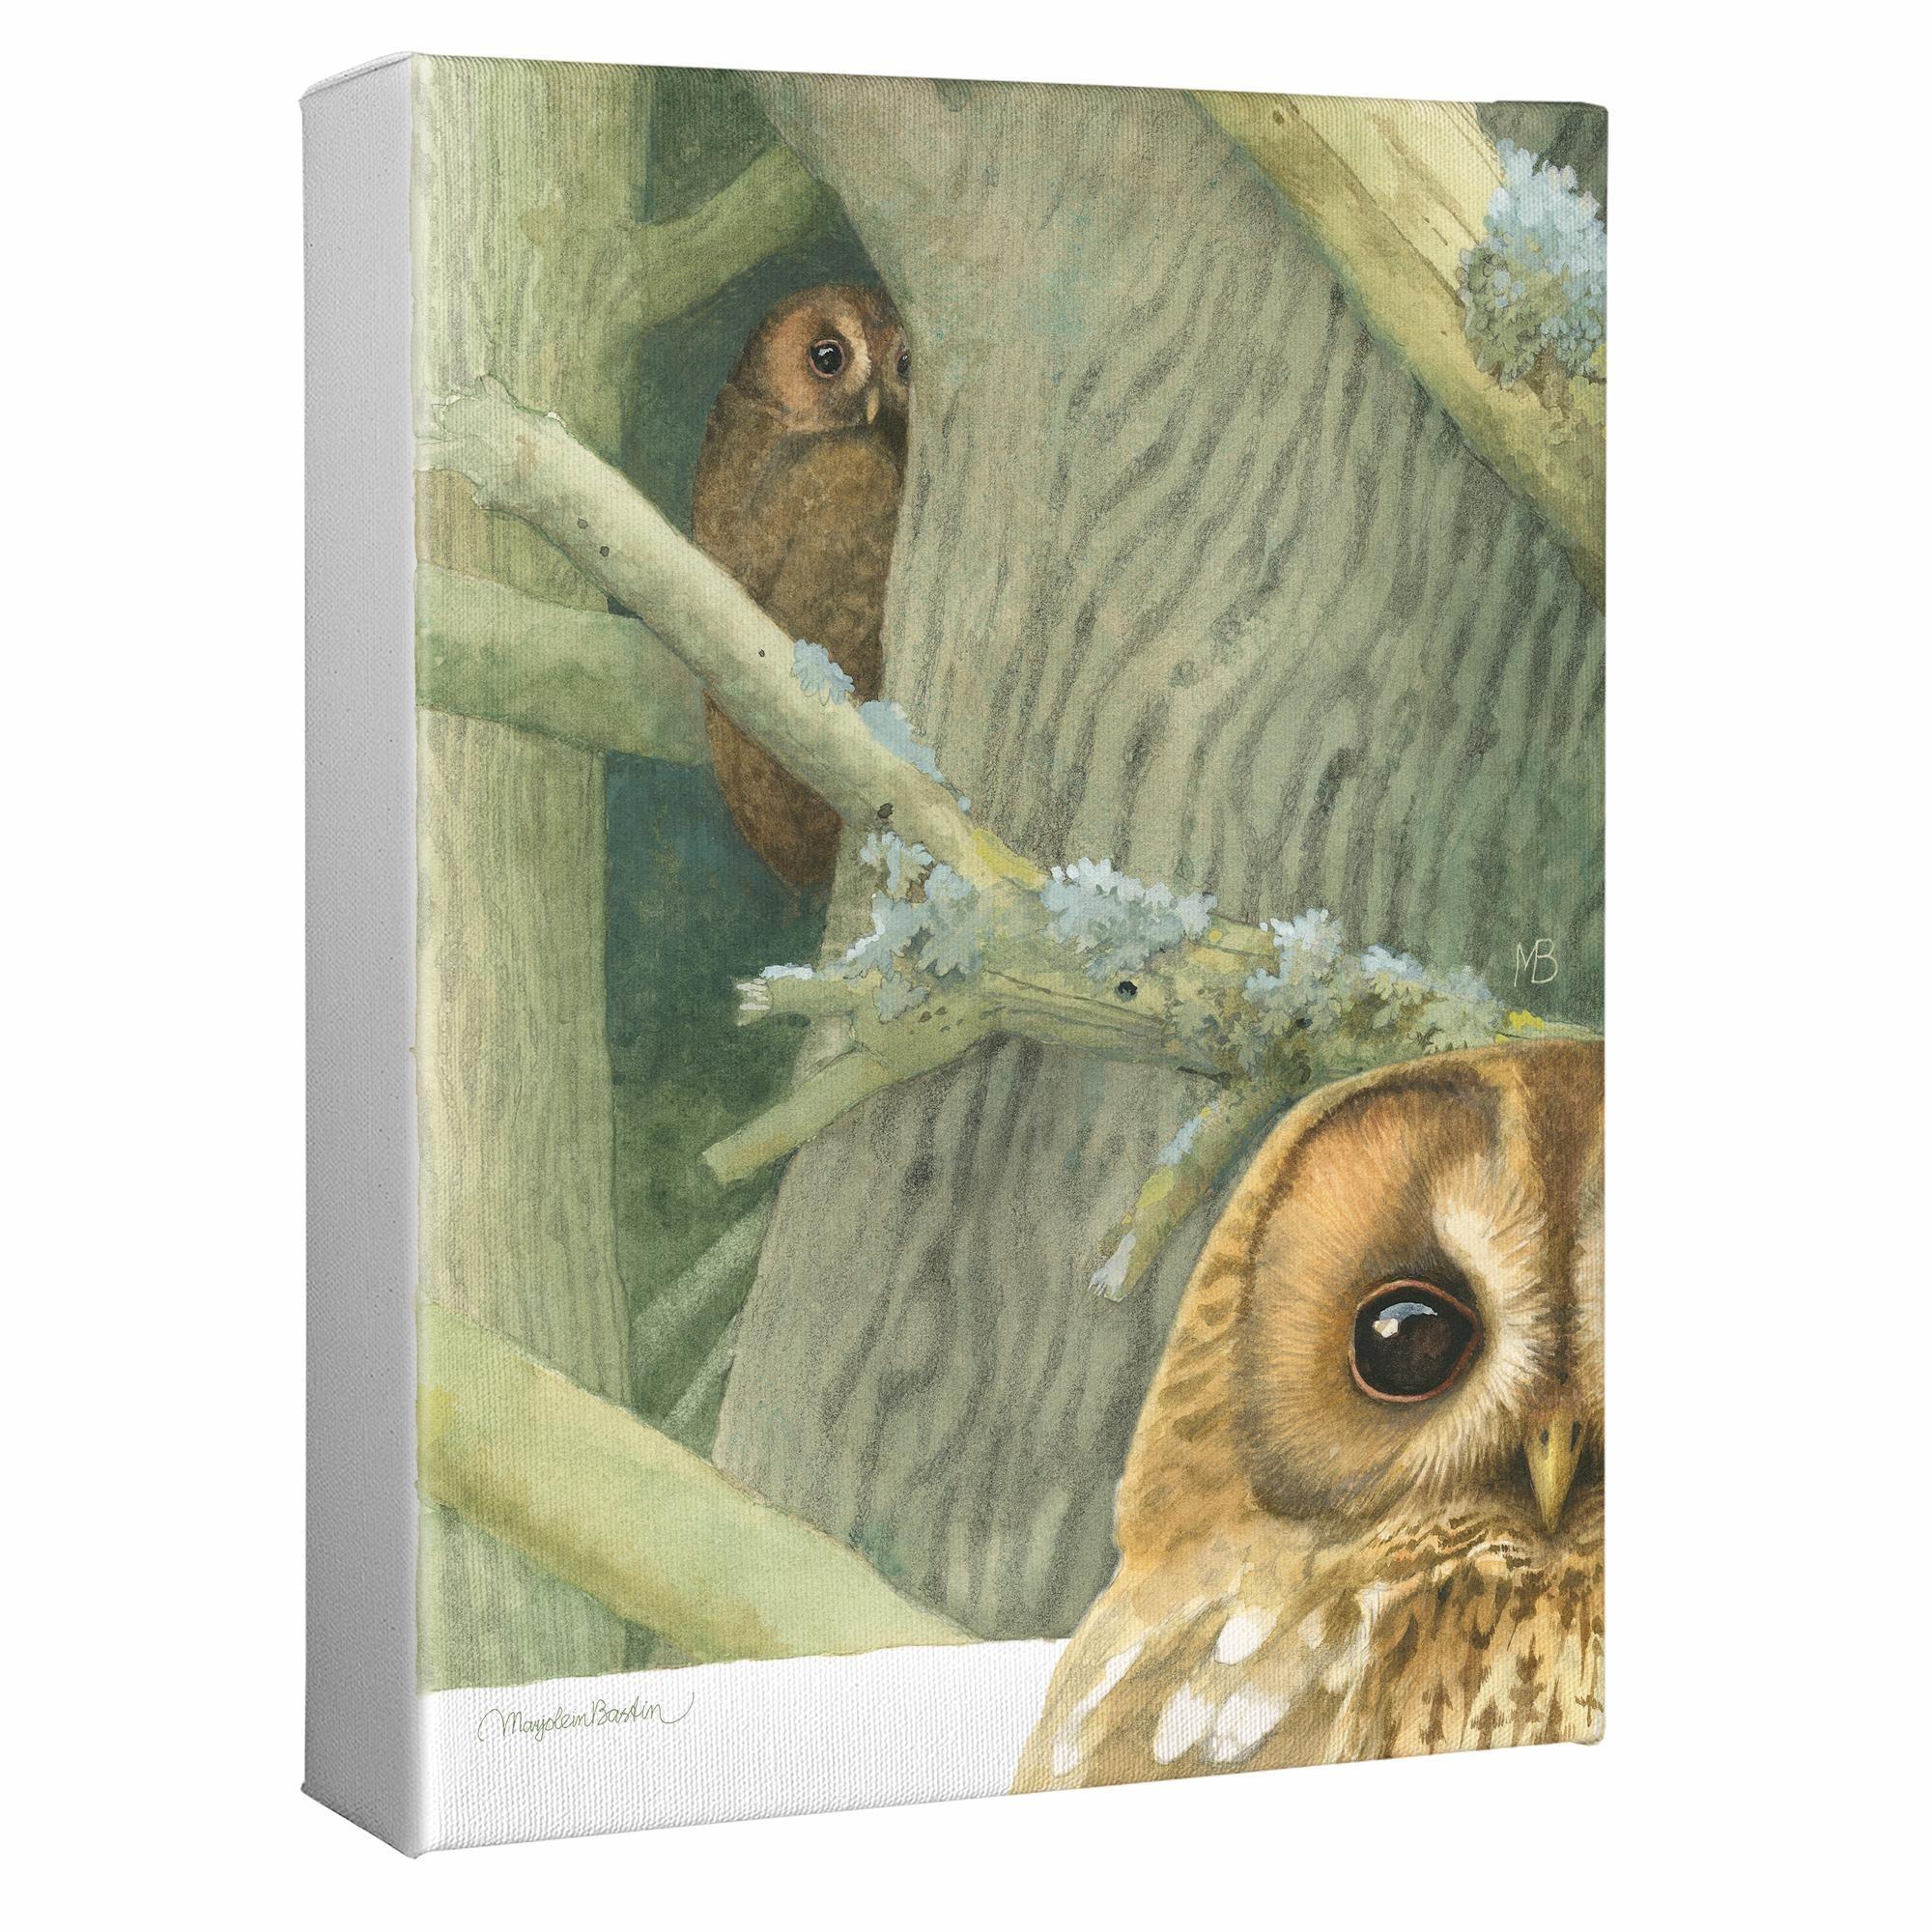 Owls Around the House Gallery Wrapped Canvas - Wild Wings